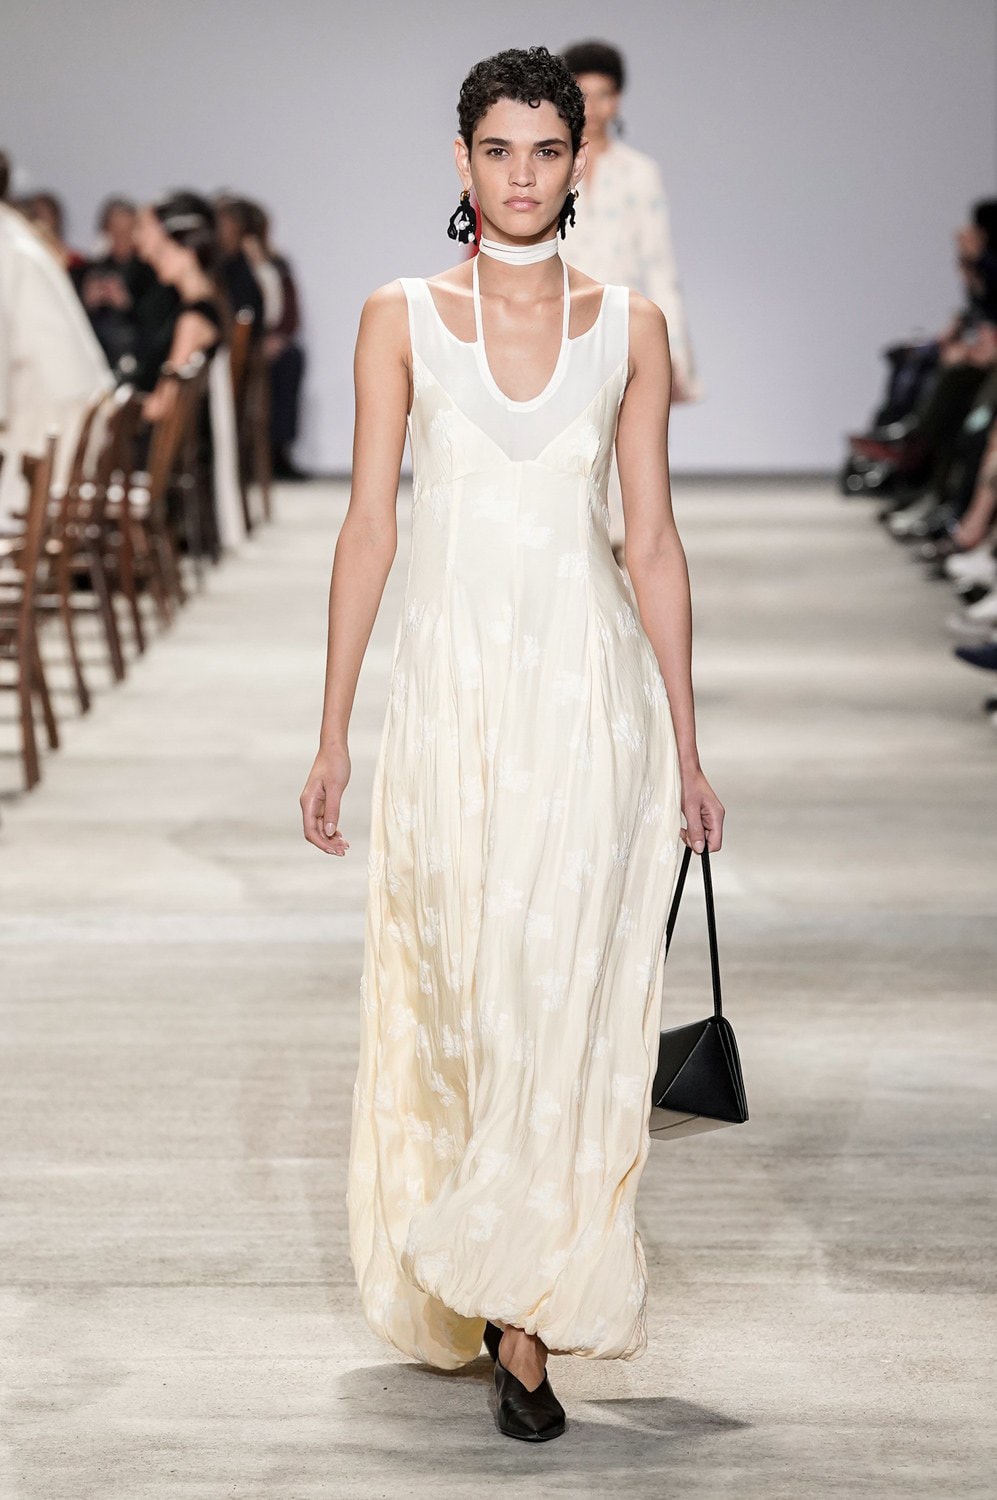 Jil Sander Fall/Winter 2020 Collection Runway Show Floral Dress White